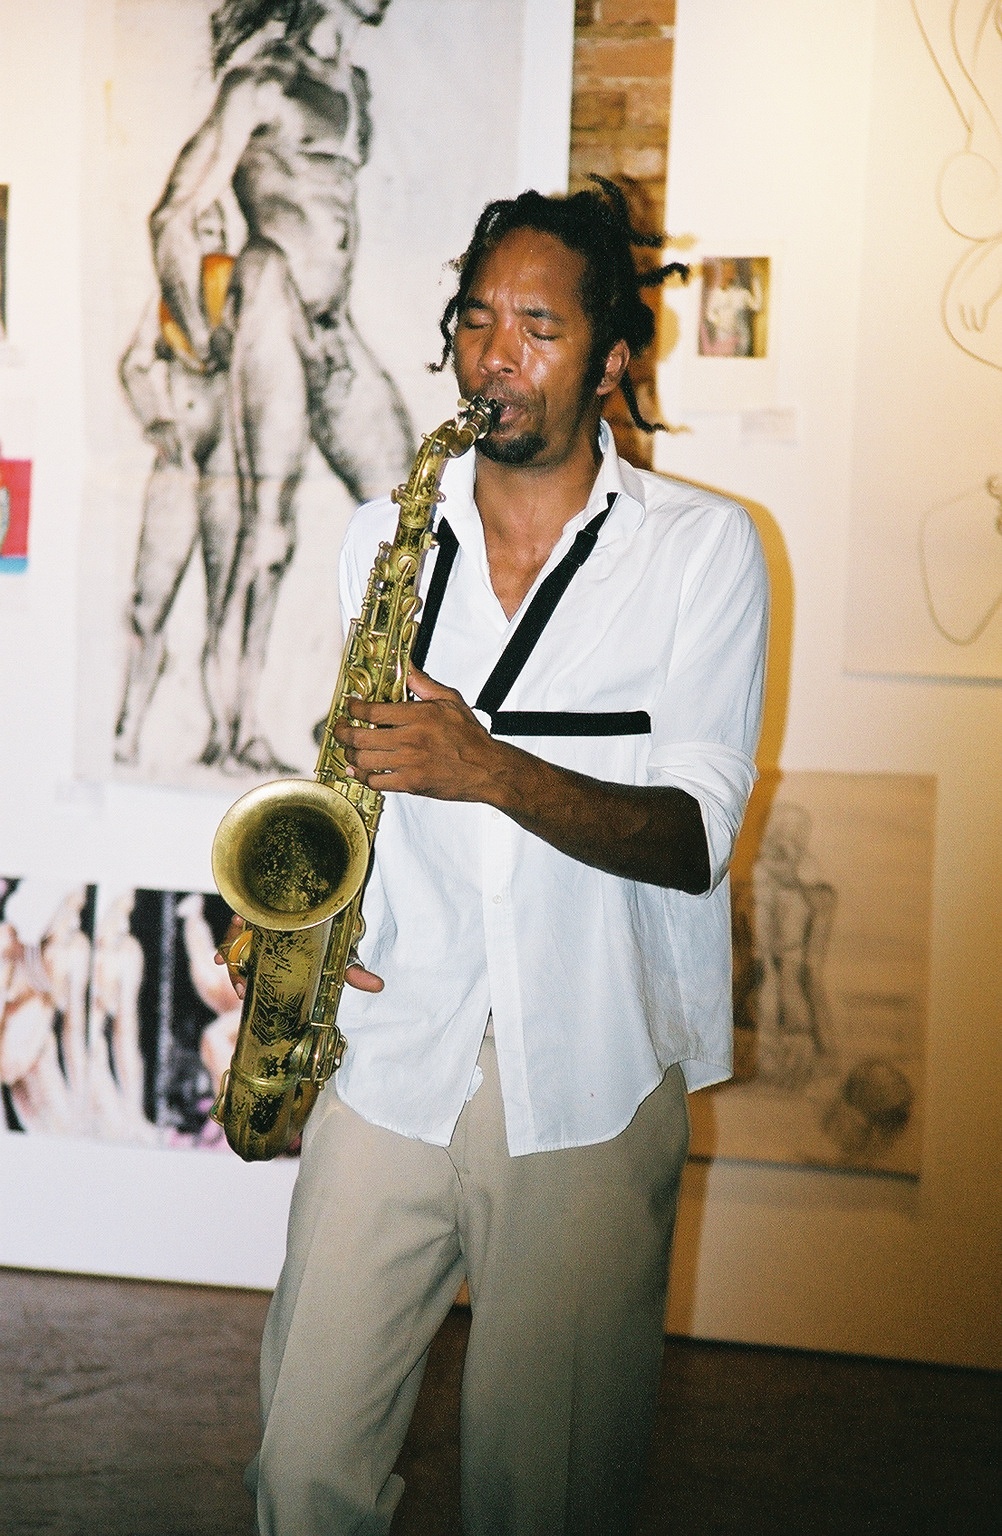 A photo of an individual wearing a white shirt and khaki pants playing the saxophone in Apache Cafe — several works of art hang on the wall.